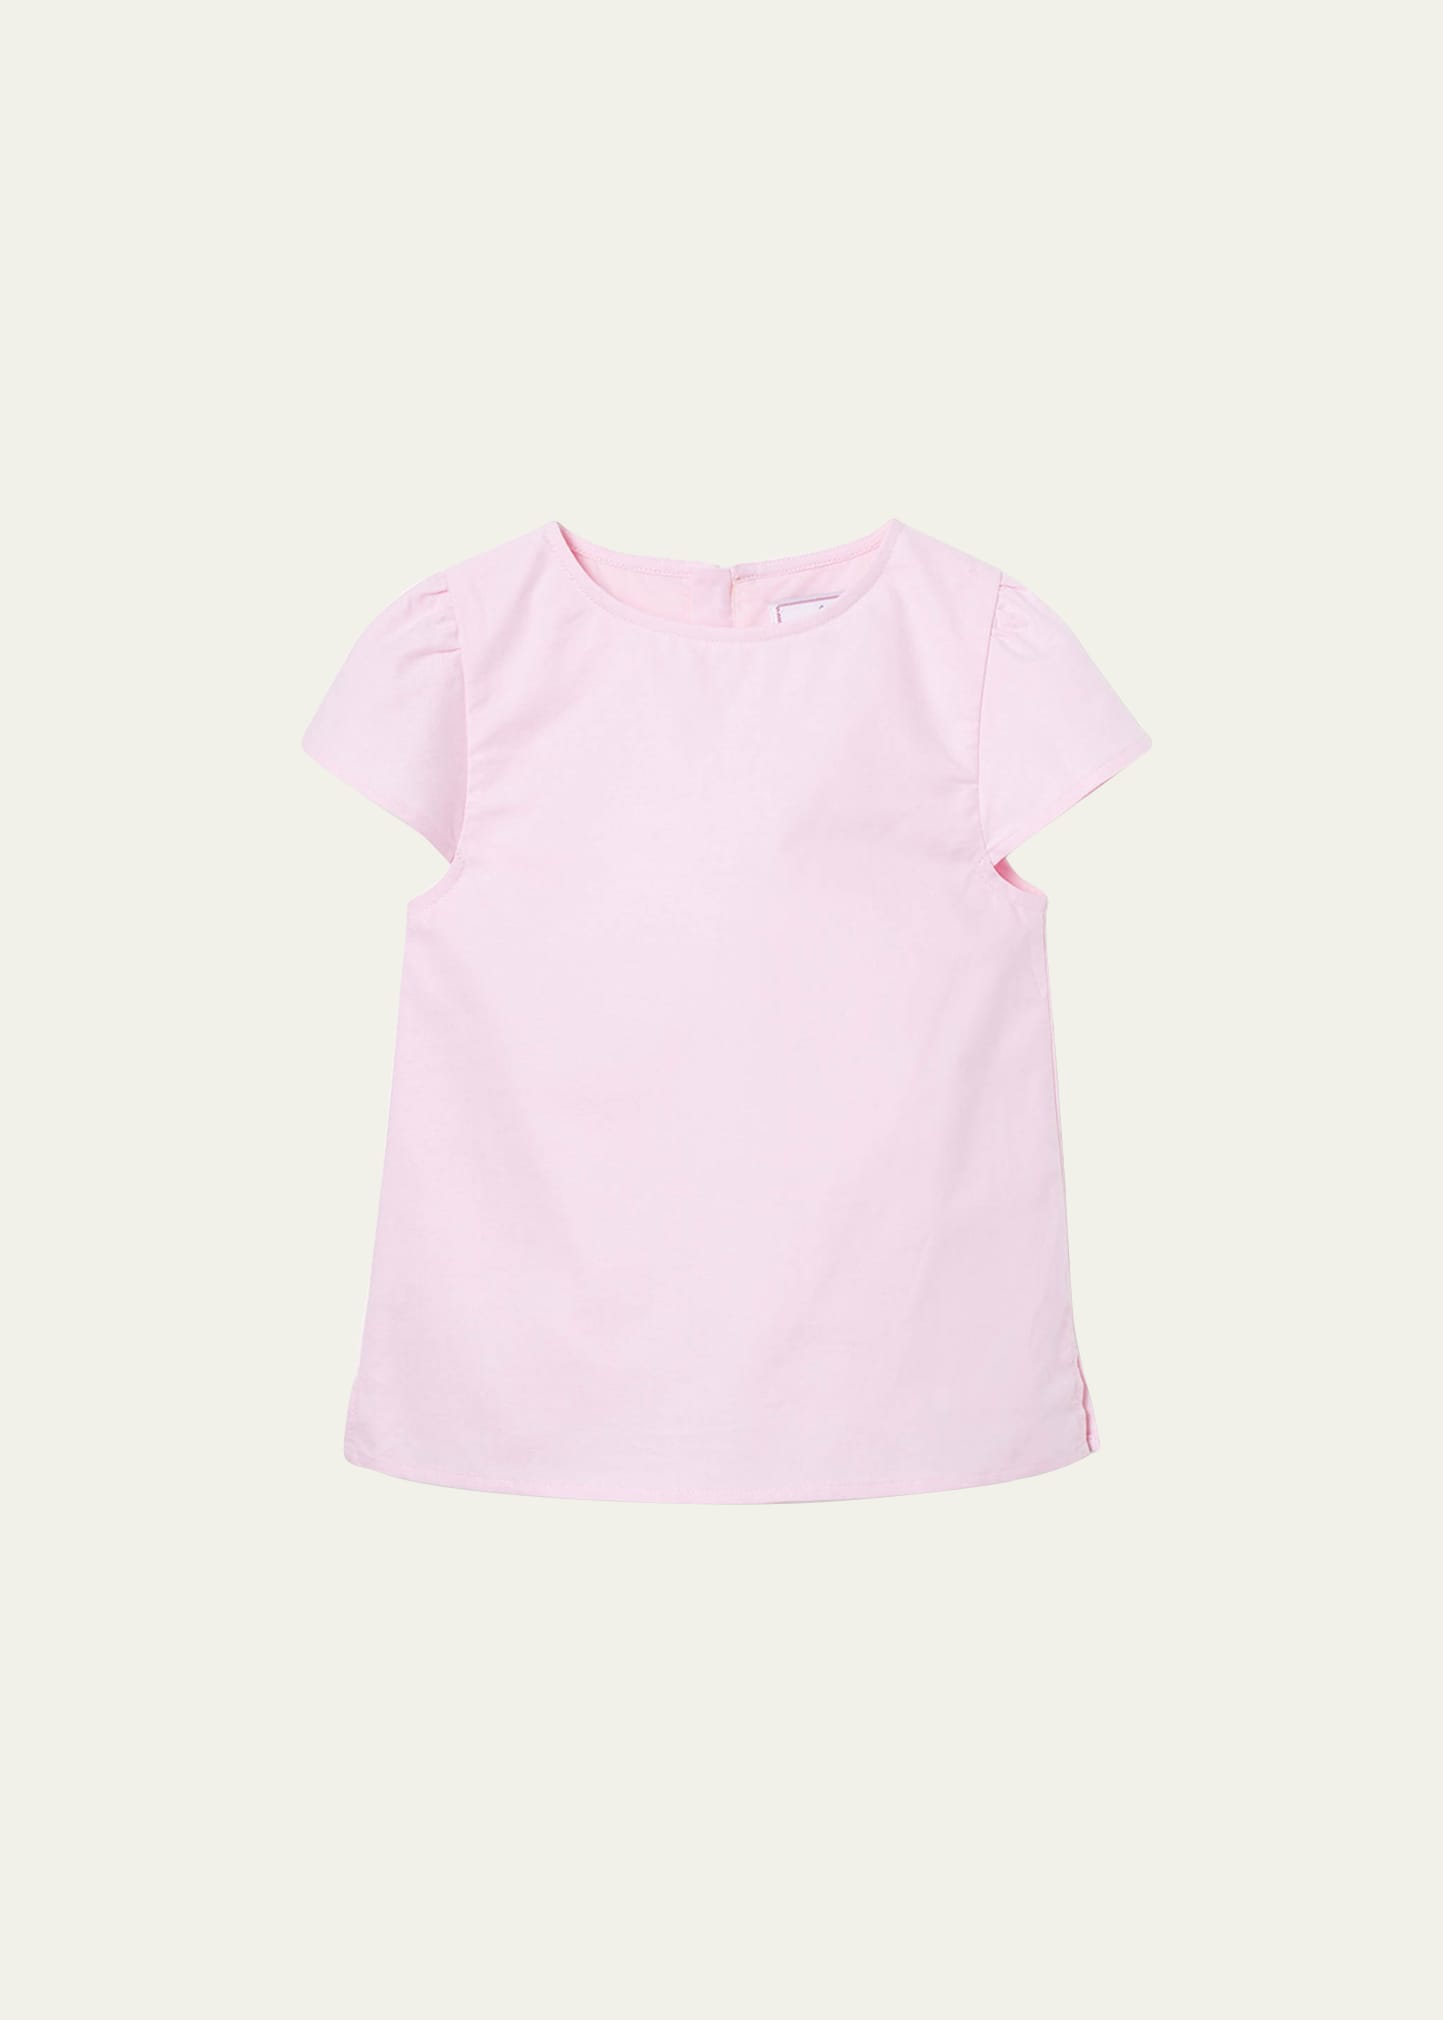 Classic Prep Childrenswear Kids' Girl's Sawyer Solid Top In Pinkesque